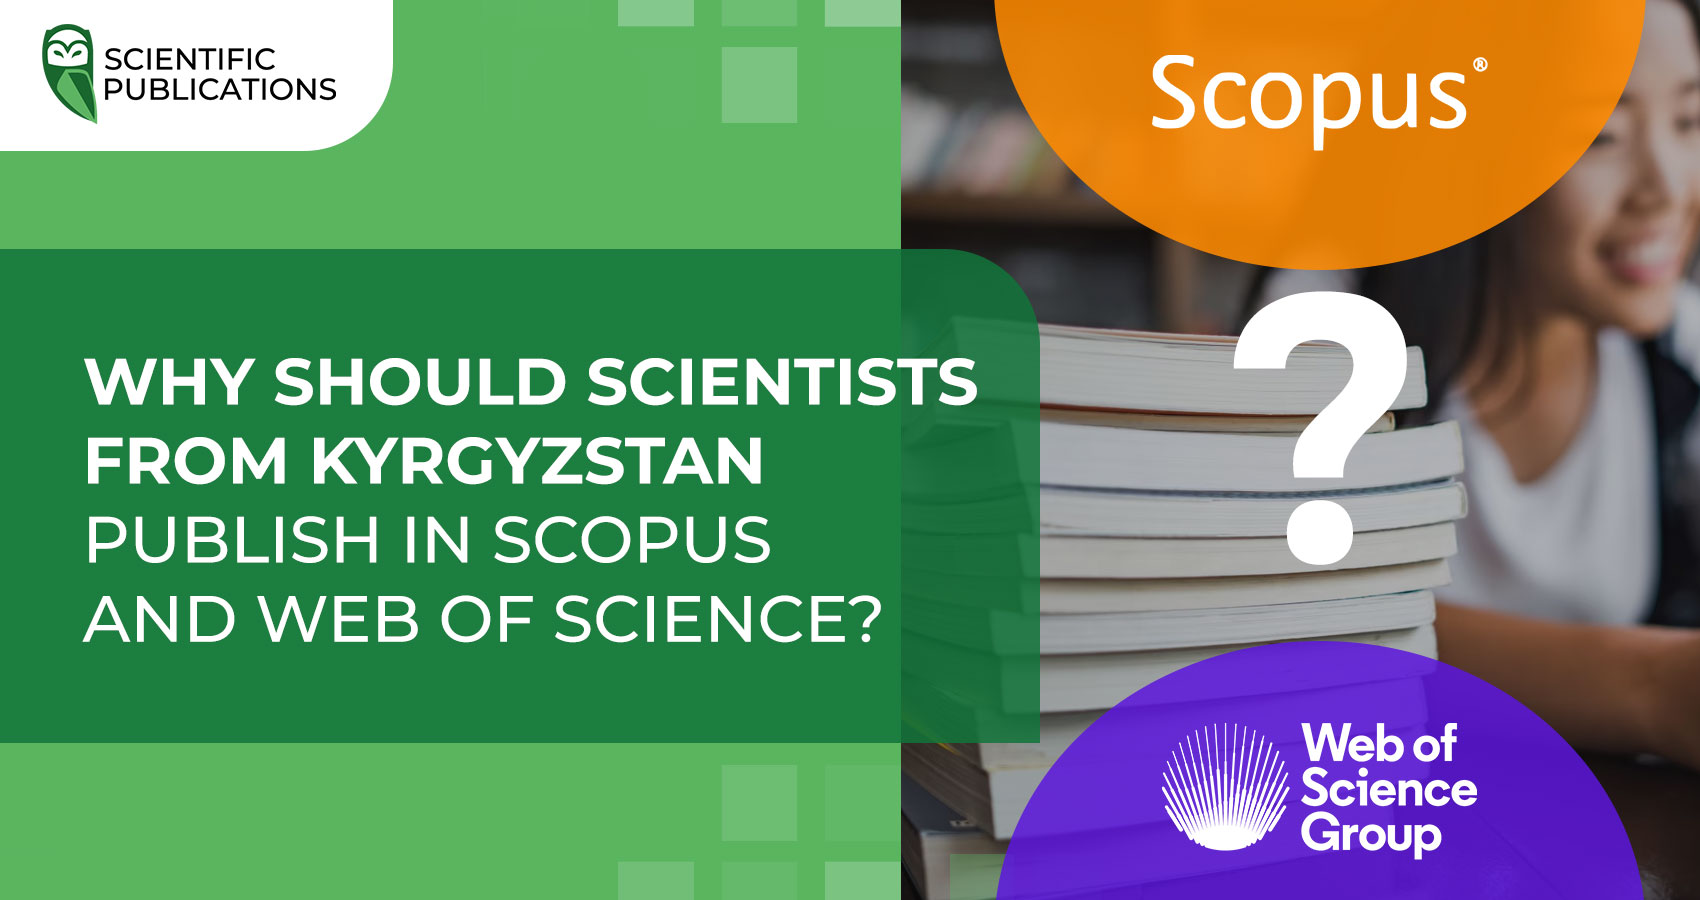 Why should scientists from Kyrgyzstan publish in Scopus and Web of Science?